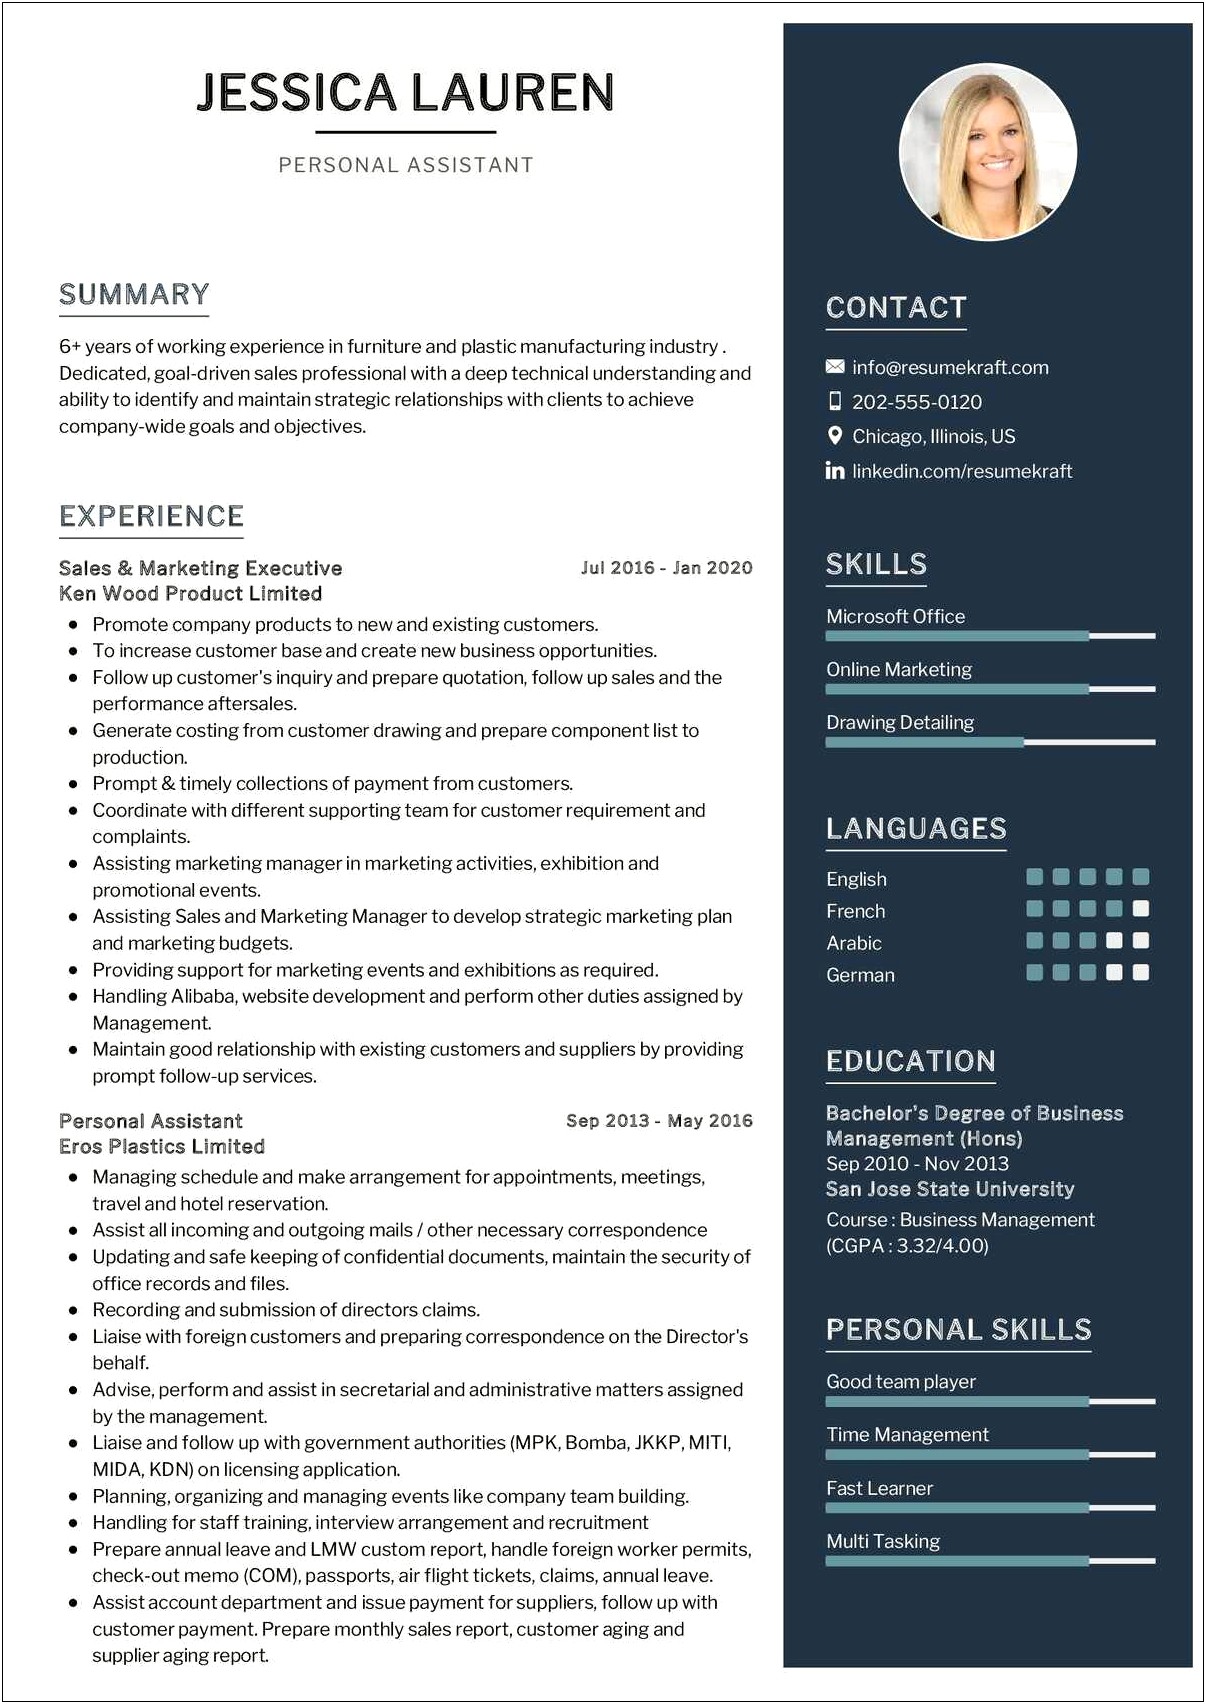 Resume Template For Secretary Or Admin Assistant